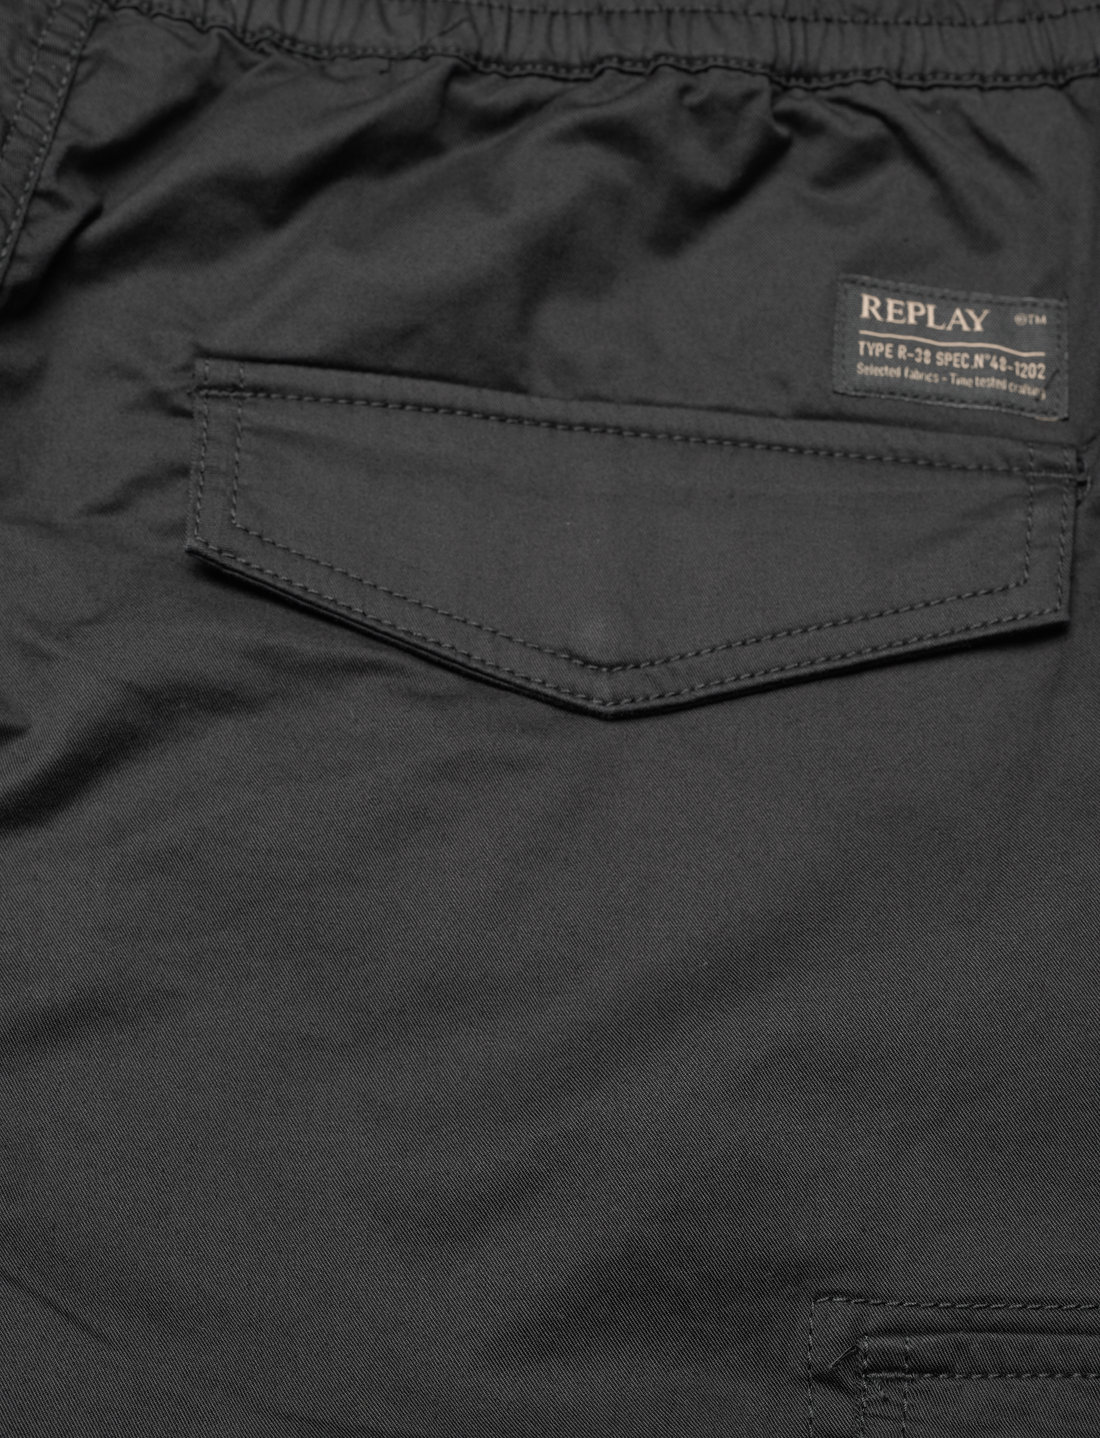 Replay Trousers Authentic Boost Project - Cargohose